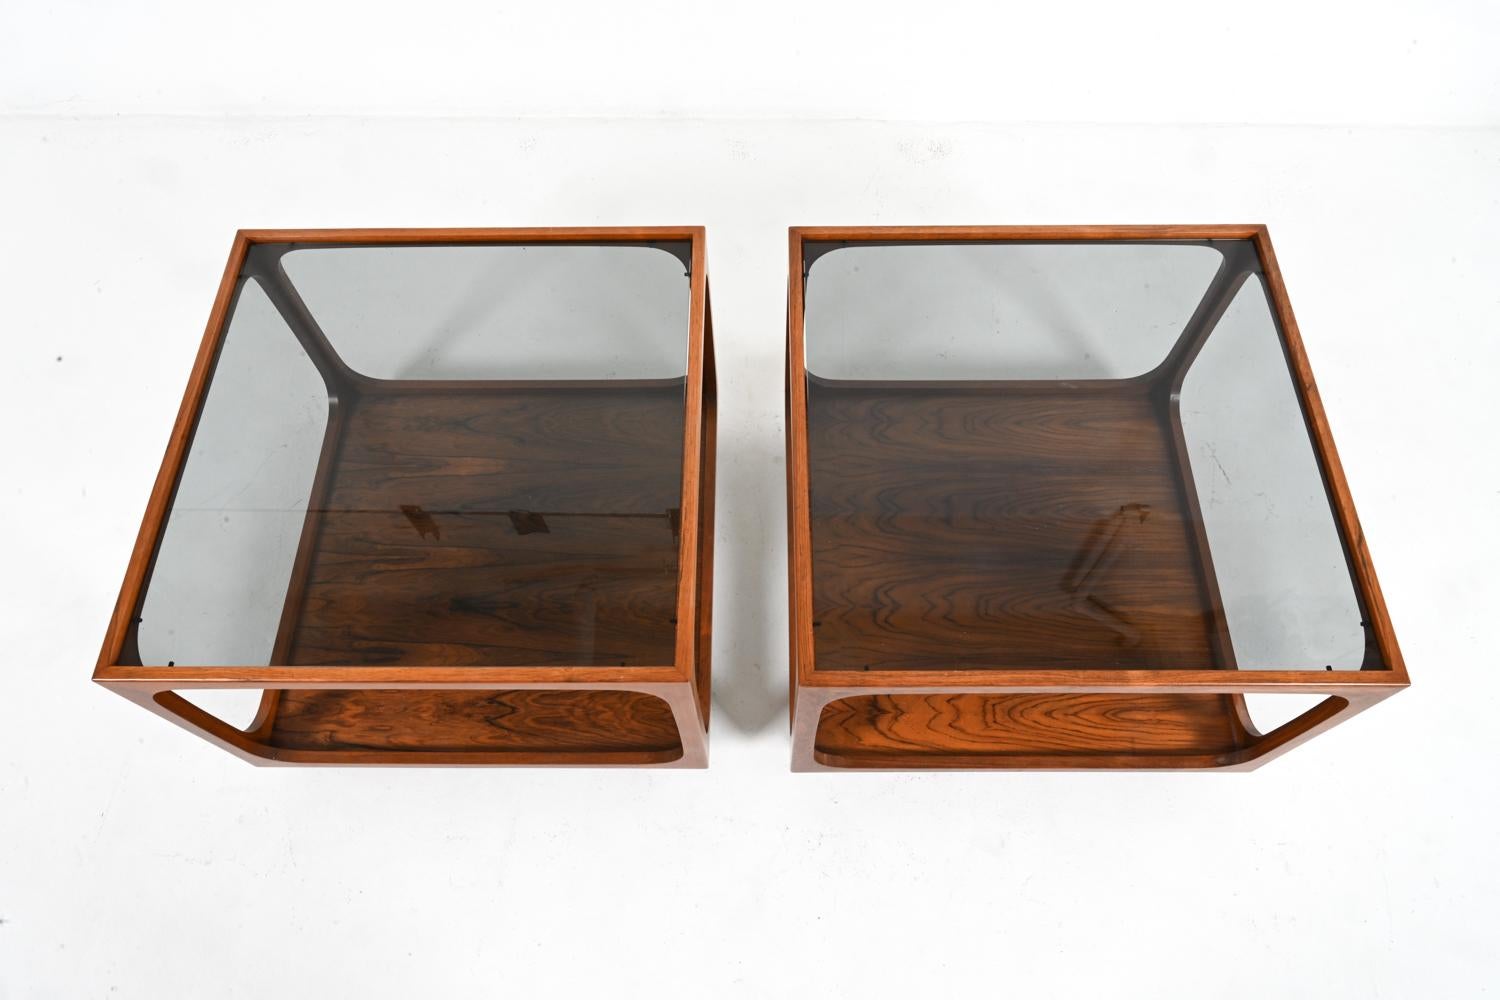 Rare Pair of Rosewood & Smoked Glass Cube End Tables Attributed to Wilhelm Renz In Good Condition For Sale In Norwalk, CT